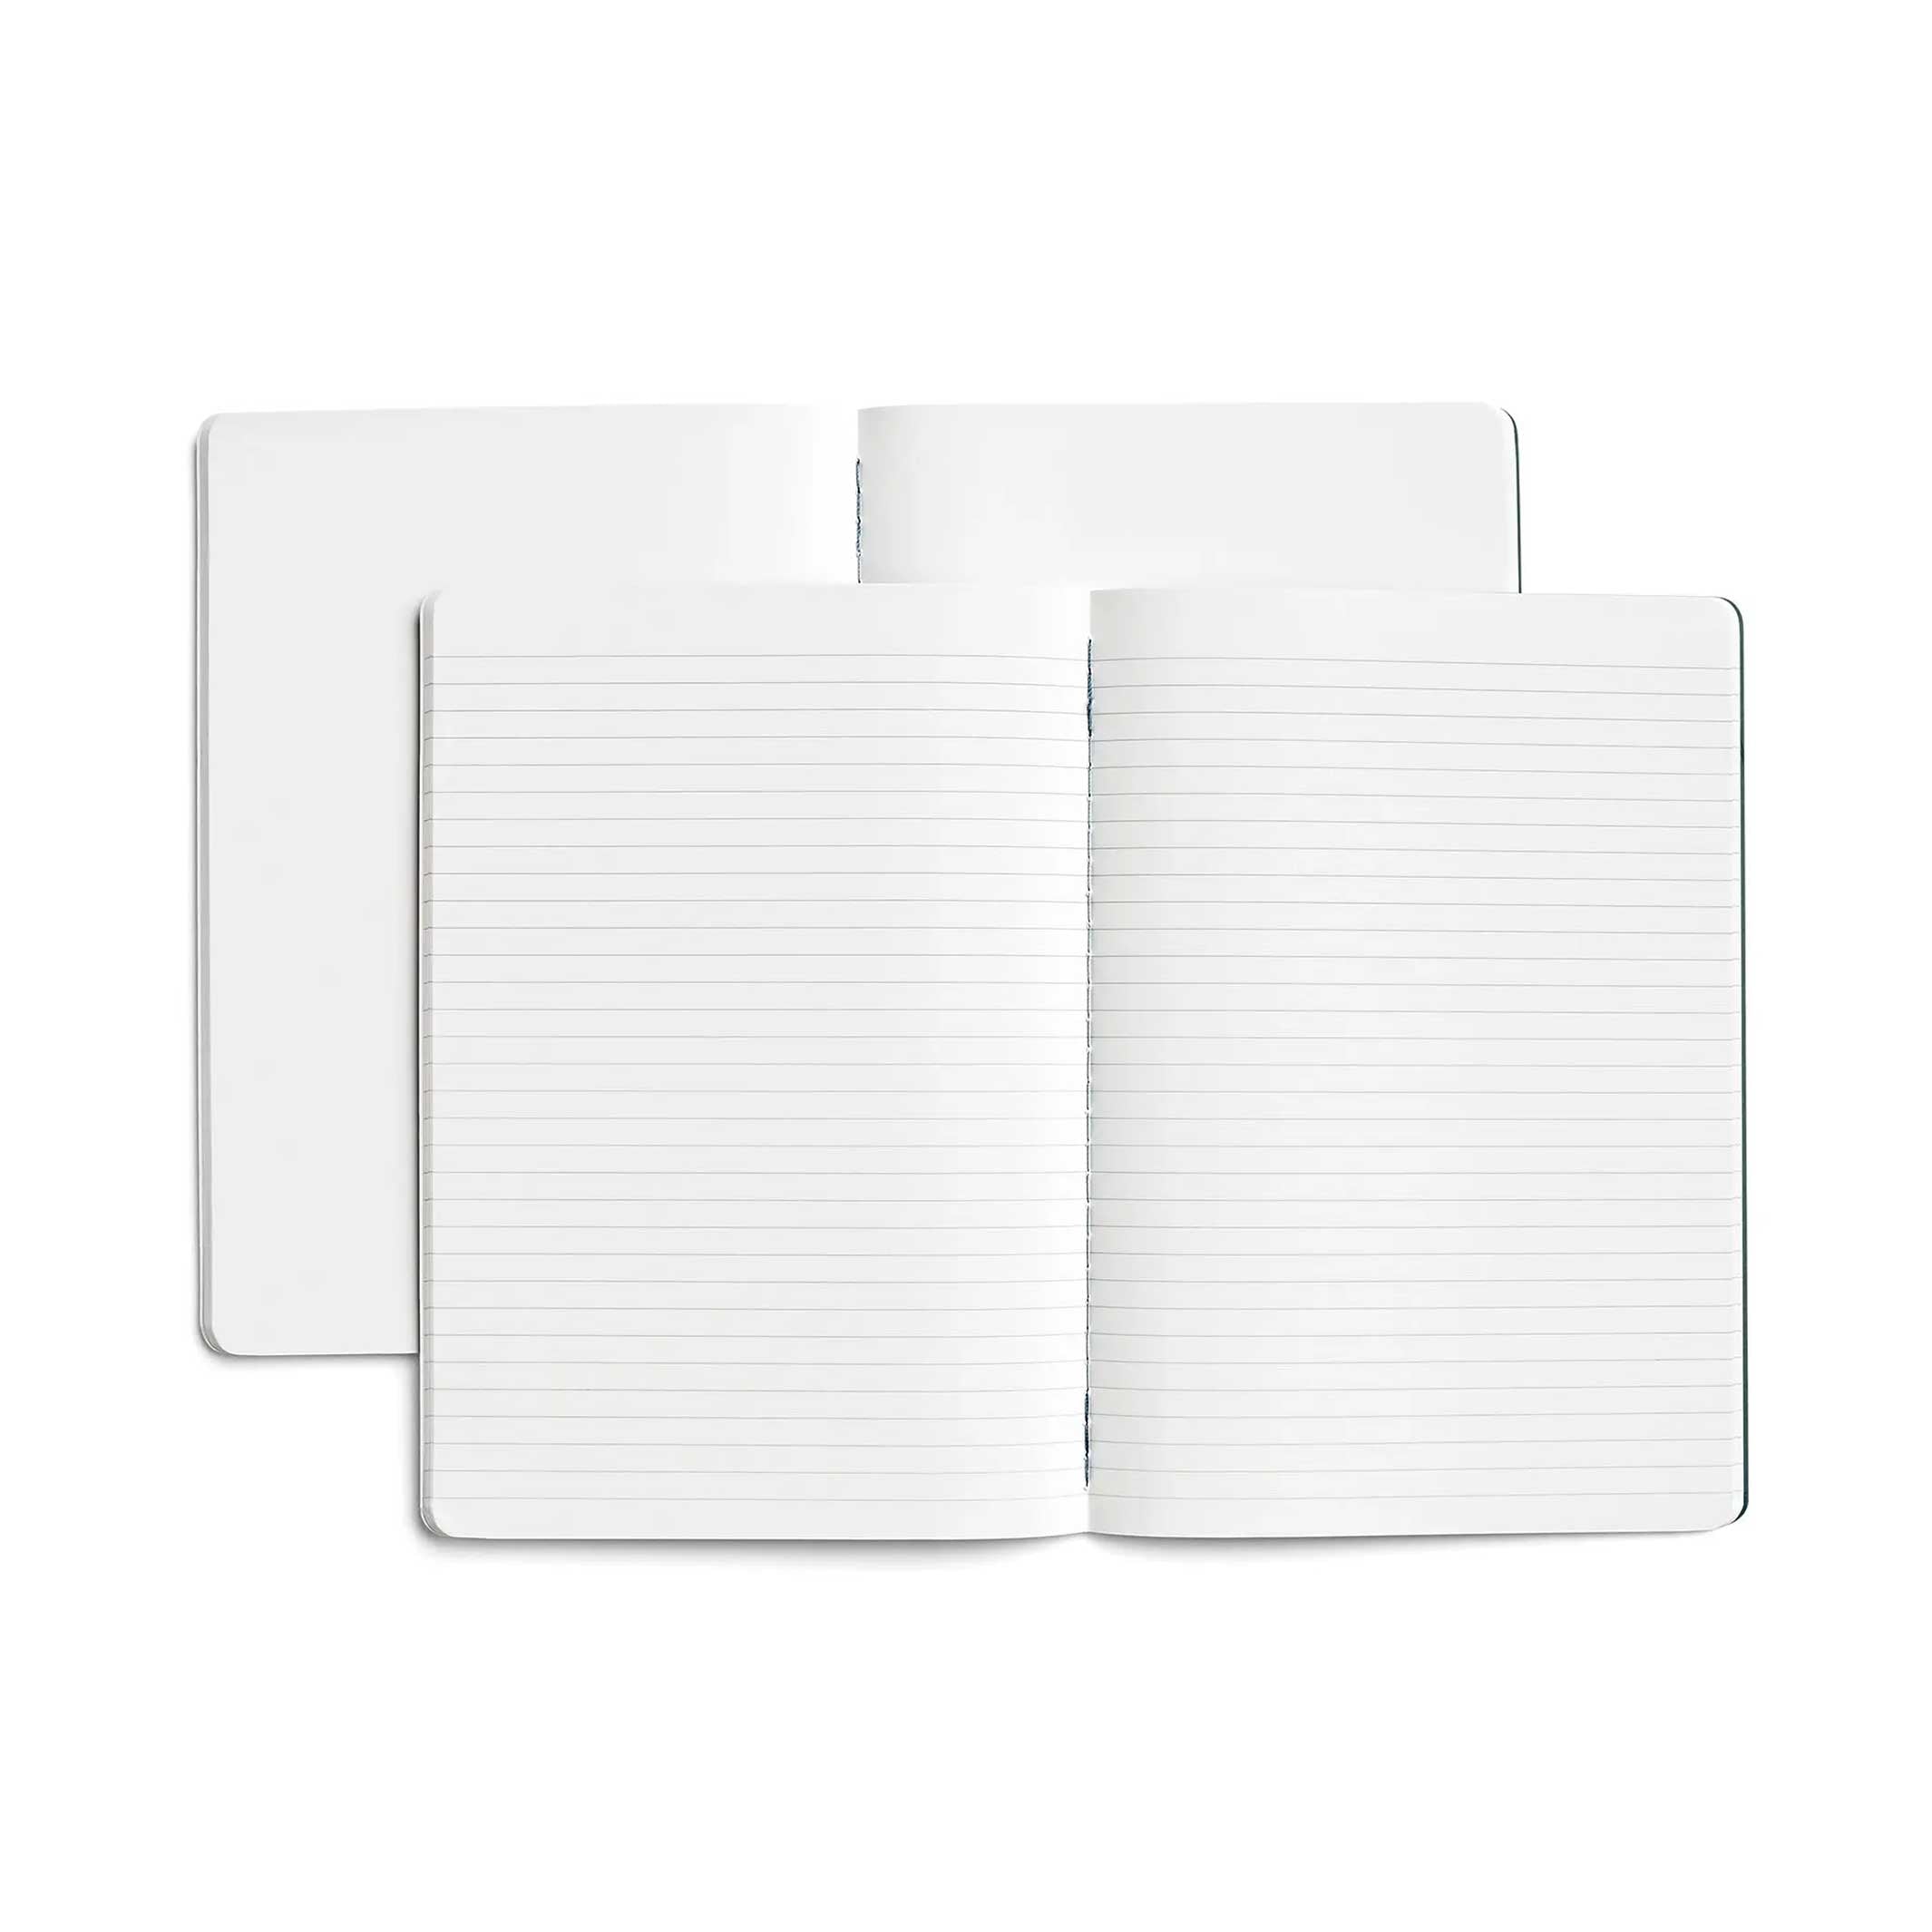 Softcover JOURNALS | Twin Pack  | A5 lined & blank | Karst Stone Paper